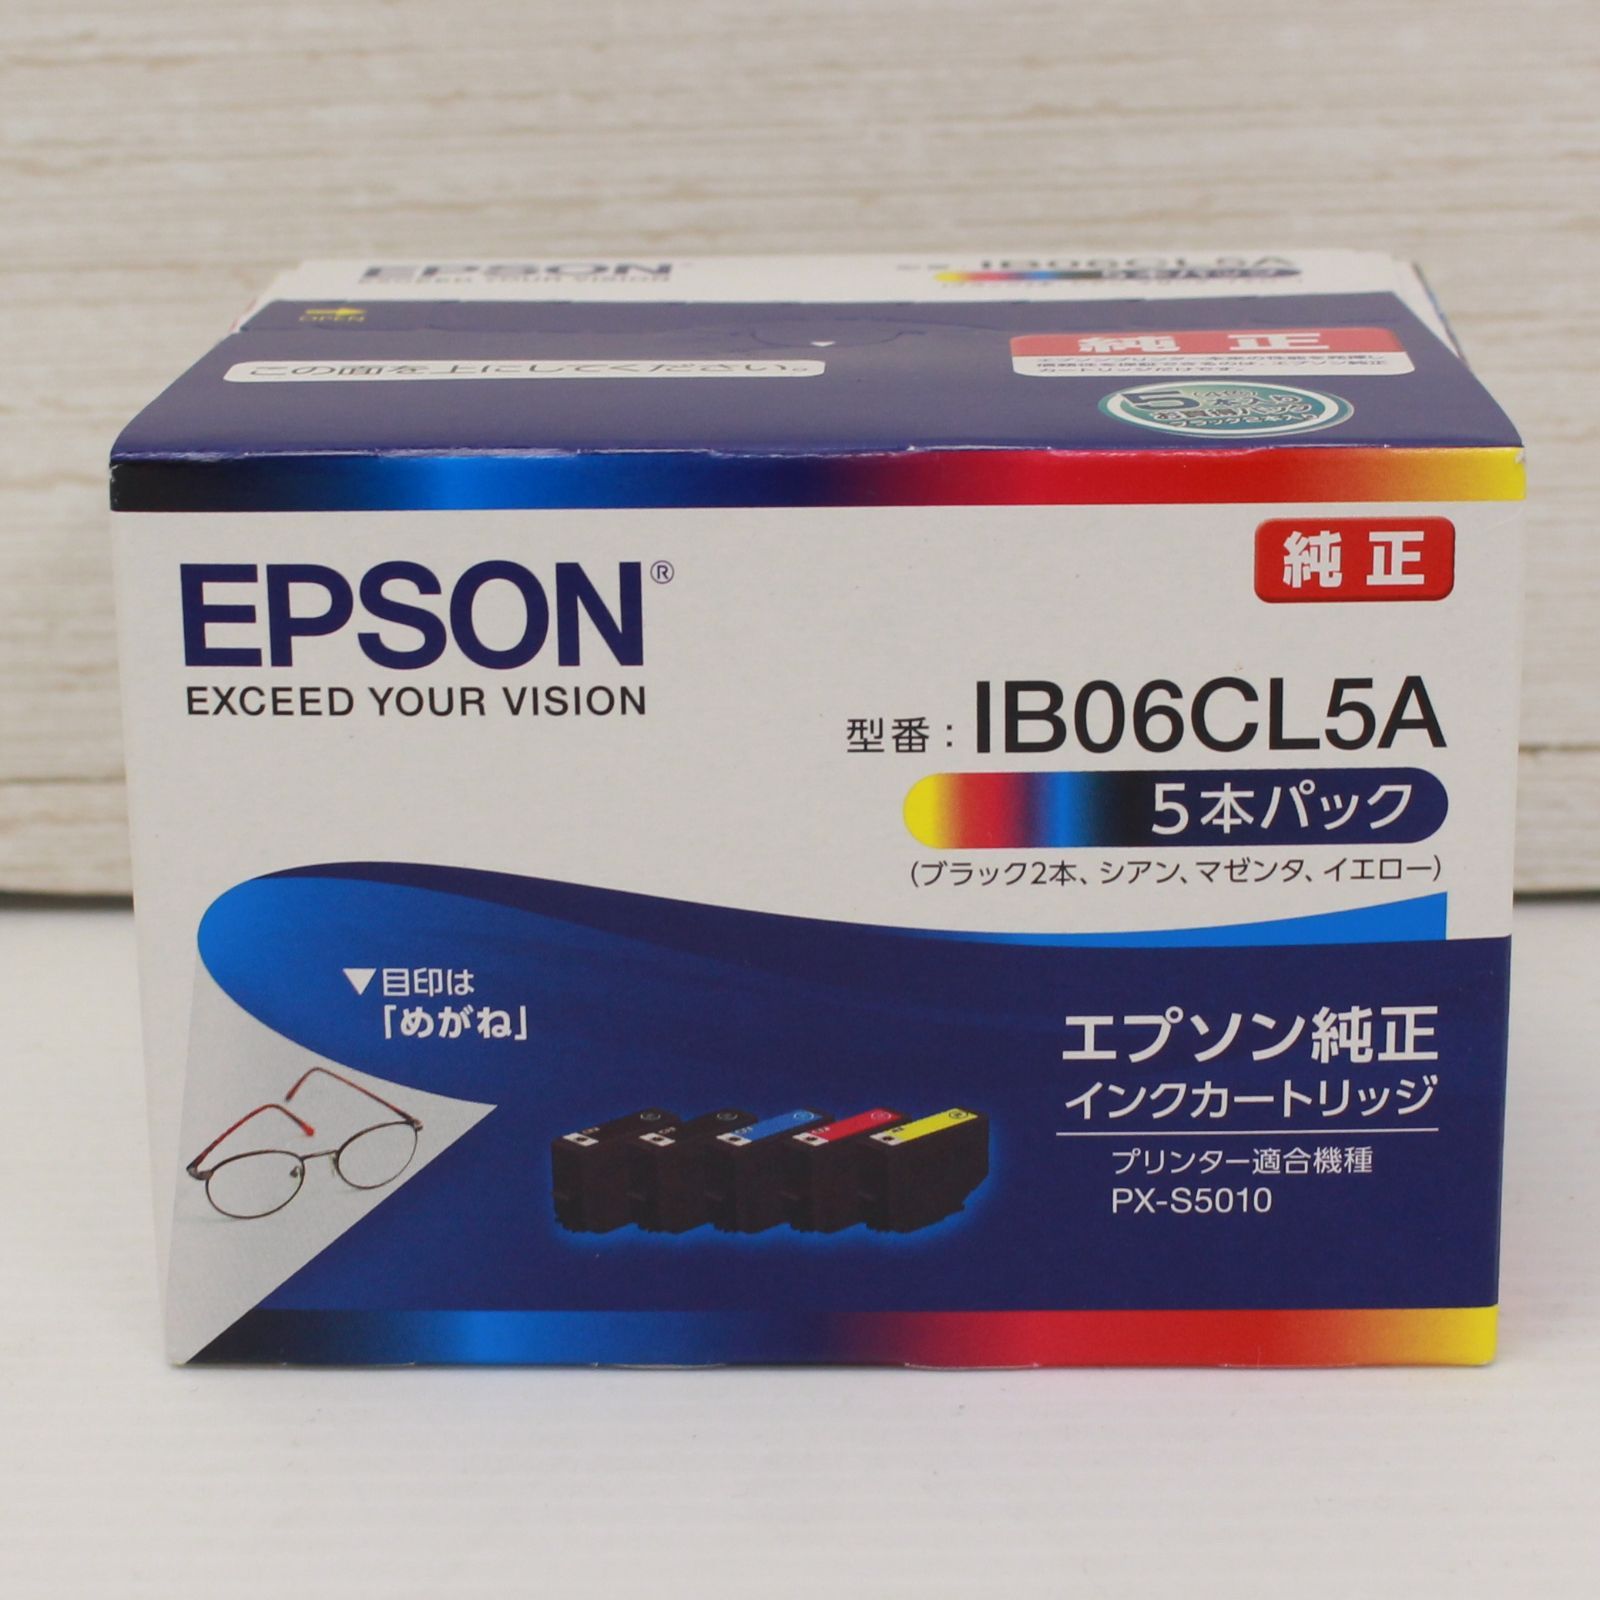 EPSON IB06CL5A PX-S5010 インクカートリッジ　5本パック